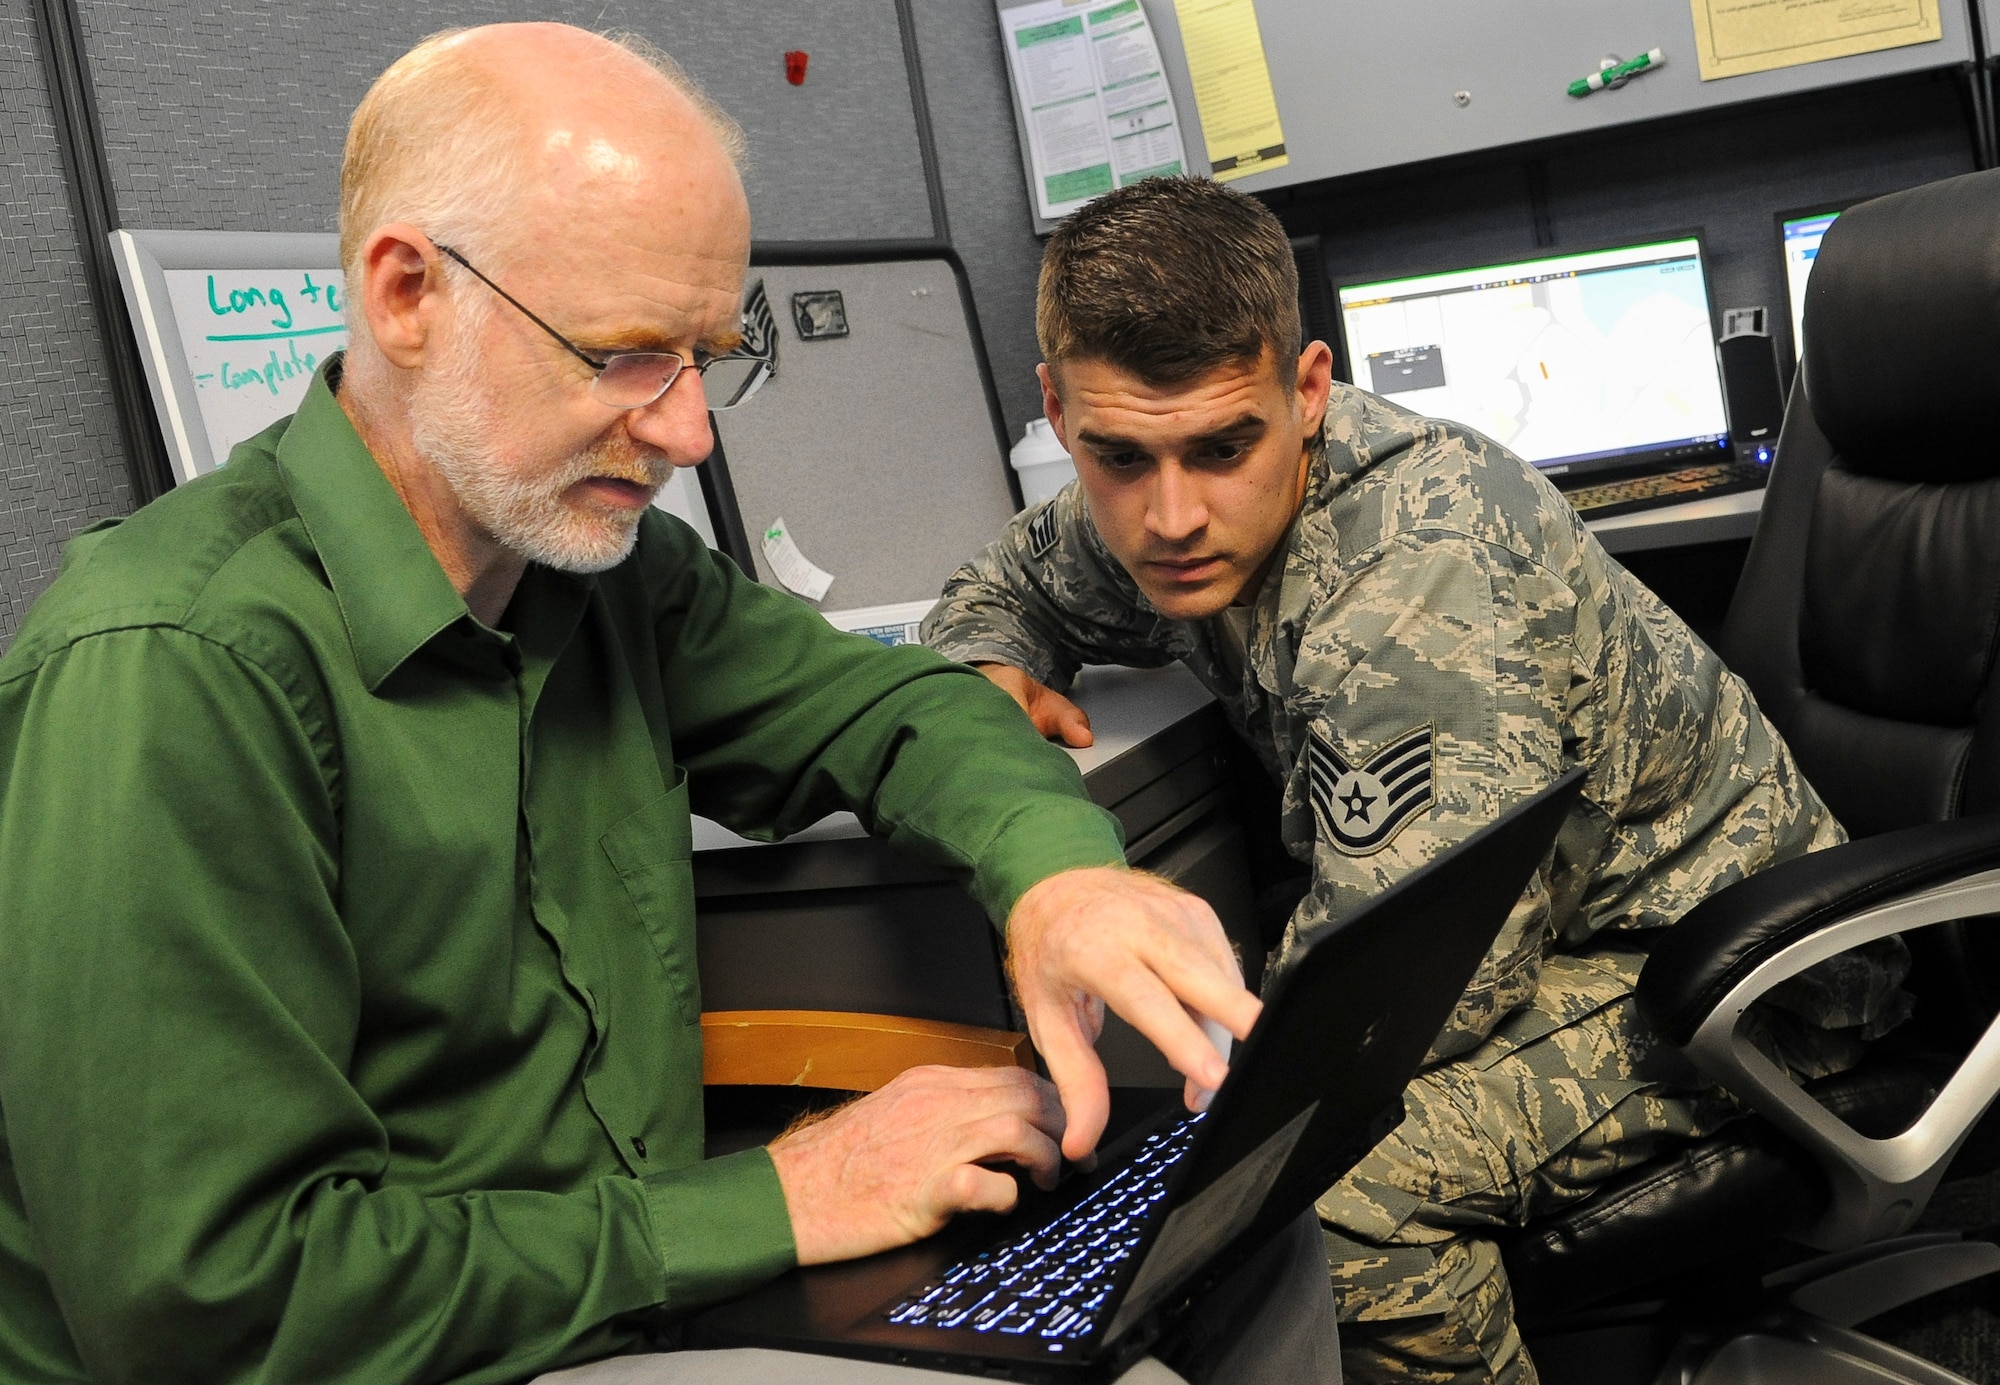 Staff Sgt. Joshua Modlin, assistant noncommissioned officer in charge of the 88th Security Forces Squadron's Electronic Security Systems (ESS), works with Joe Andrews of M.C. Dean, Inc. to establish a configuration baseline by ensuring the more than 16,000 ESS assets throughout Wright- Patterson Air Force Base, Ohio are accurately identified, Sept. 20,2107. Andrews helped to develop the Infrastructure Maintenance Management System (IMMS) being implemented throughout the Air Force to not only track maintenance of critical ESS infrastructure, but also help to identify trending problems and develop improvements that can be implemented enterprise wide. Andrews is part of the BCF Solutions team taking over the maintenance and management of Wright-Patt's ESS on Oct. 1. (U.S. Air Force photo/Jim Varhegyi)